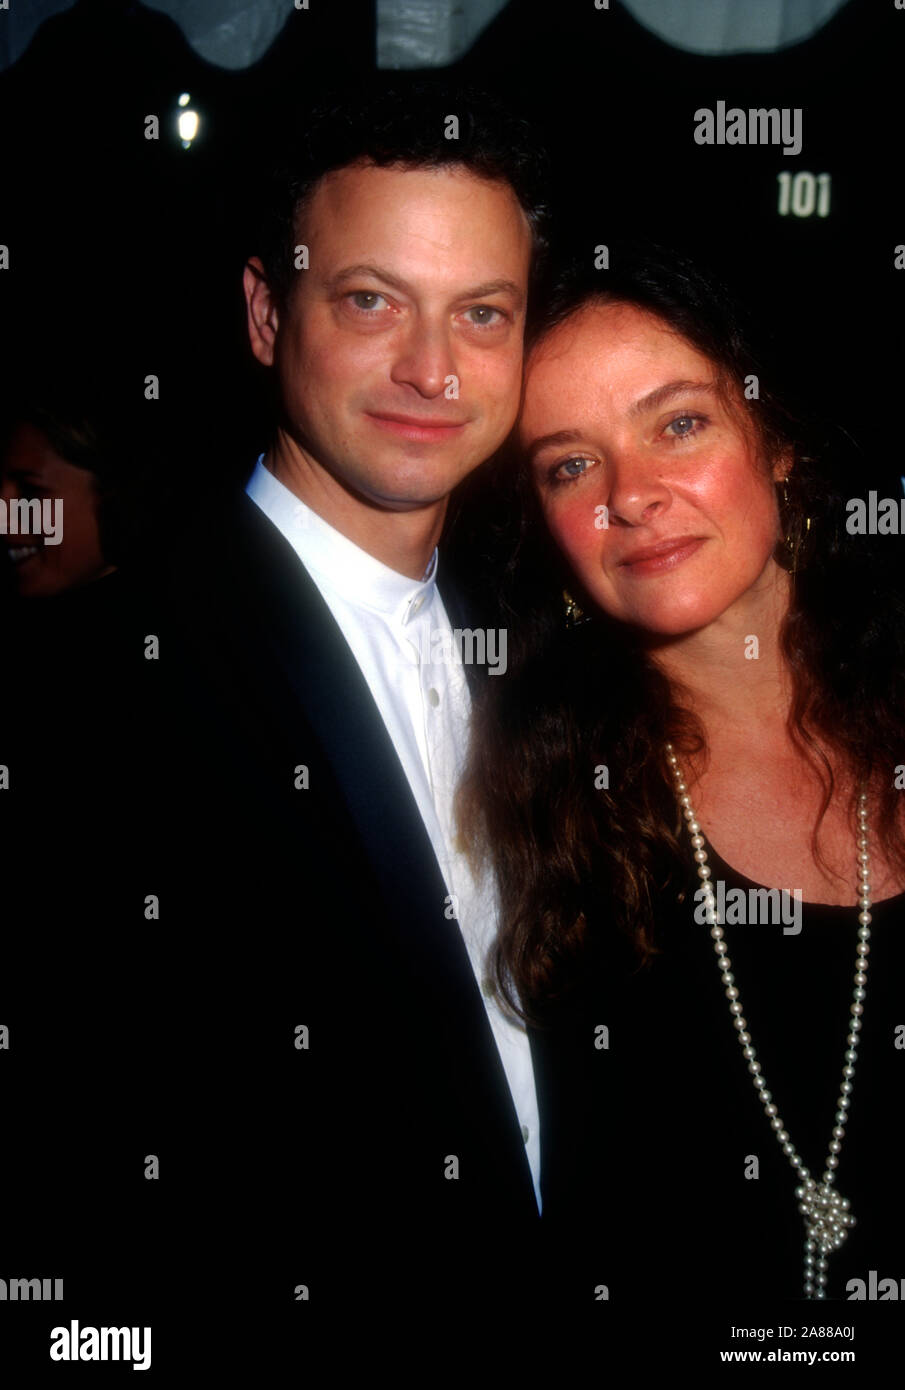 Universal City, California, USA 5th March 1995 Actor Gary Sinise and wife Moira Harris attend the 21st Annual People's Choice Awards on March 5, 1995 at Sound Stage 12, Universal Studios in Universal City, California, USA. Photo by Barry King/Alamy Stock Photo Stock Photo